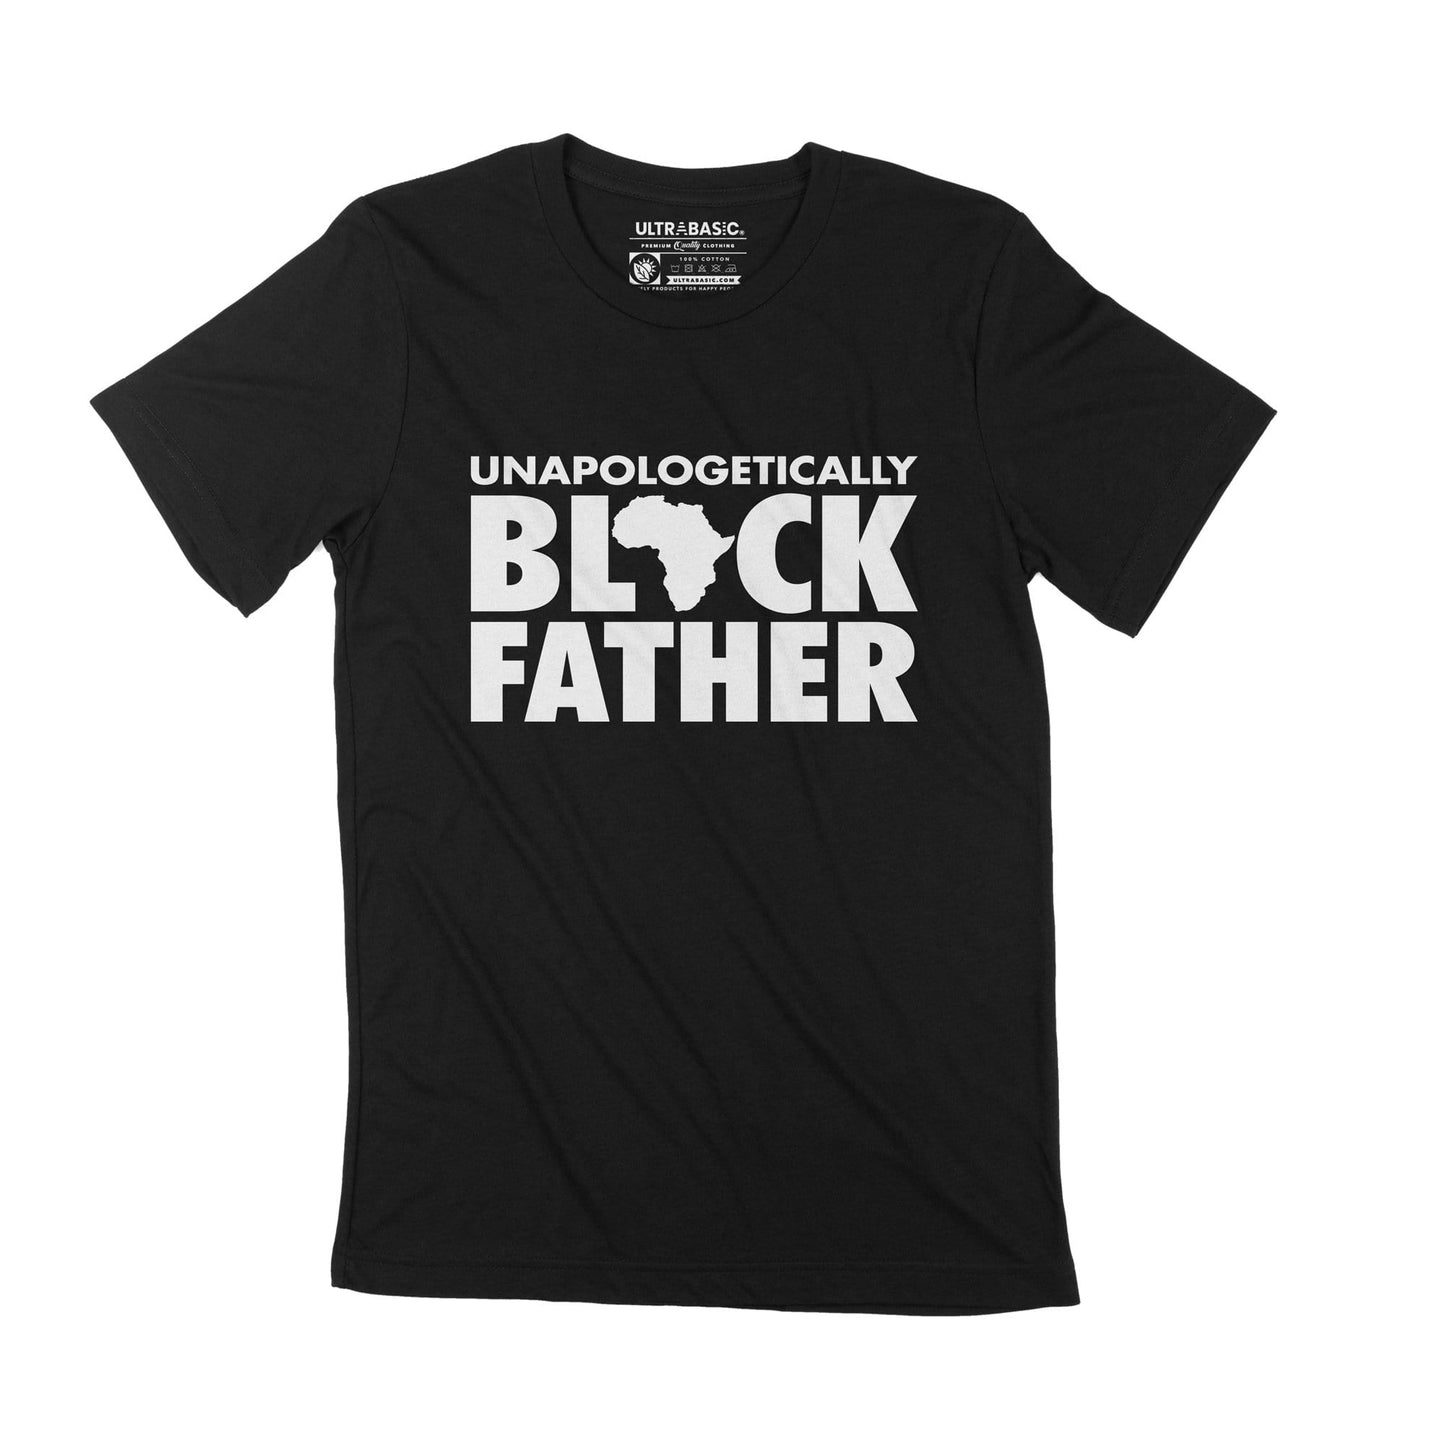 black leader father queen king all lives matter african american pride floyd men dad vintage brutality apparel election women short sleeve youth girl boy authentic history inspiring cotton culture democrate custom class 2020 obama plain equality blm